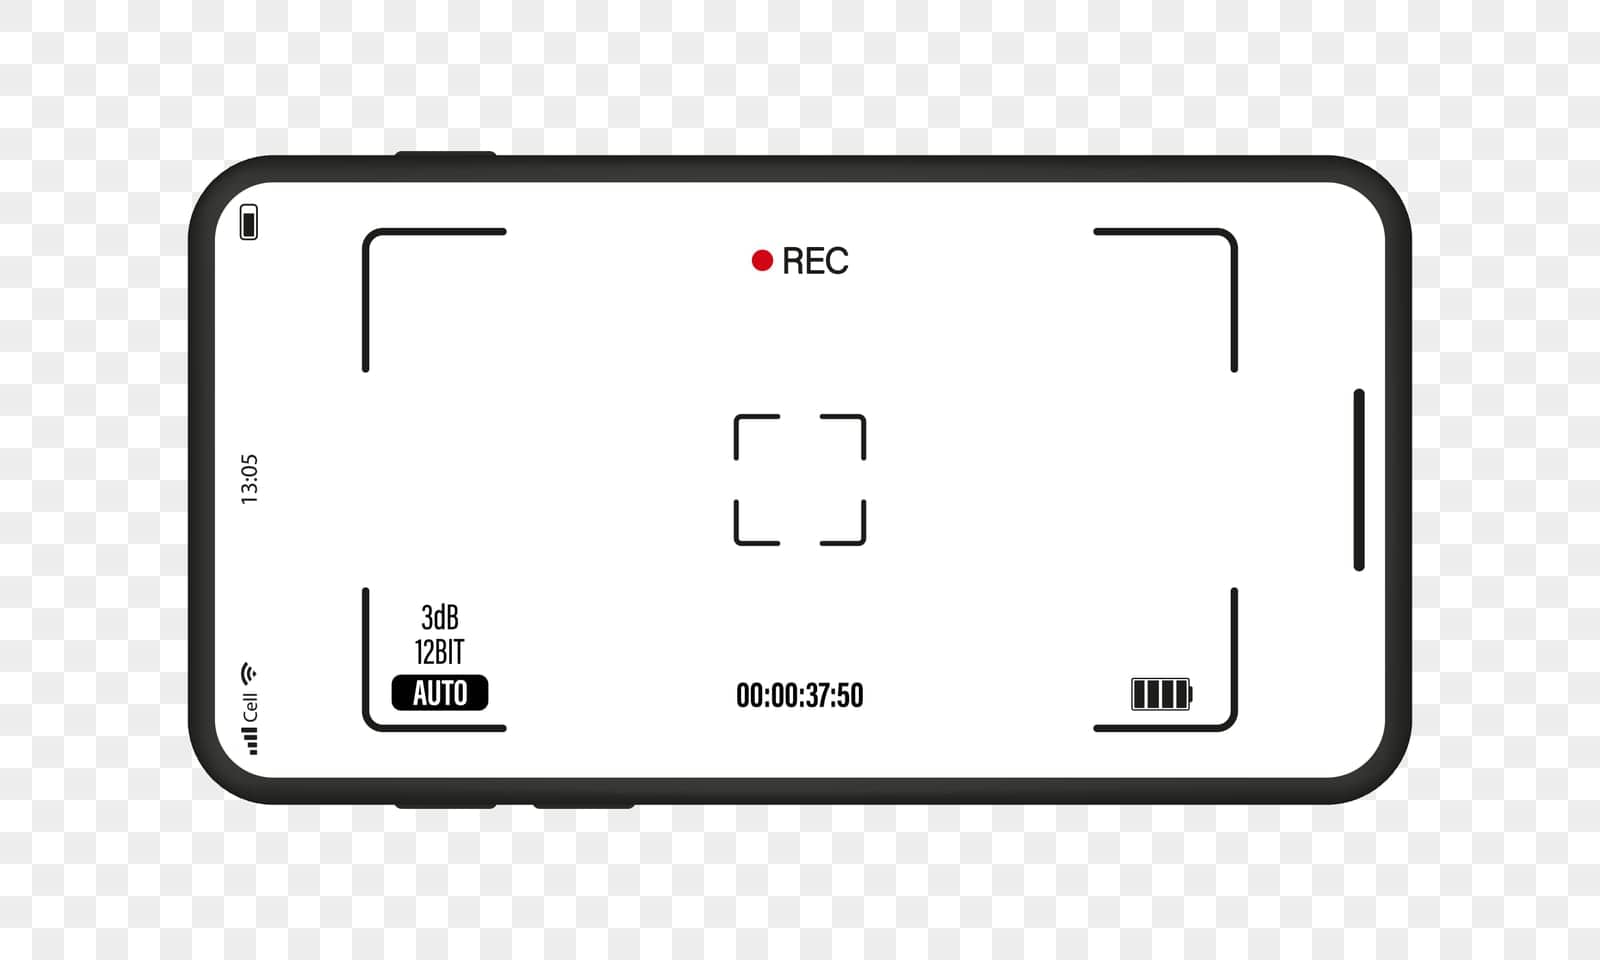 Focus of Camera Viewfinder. Focusing Screen of the Camera on Smartphone. Interface Viewfinder with Digital Camera Settings on Mobile Phone on transparent background. Vector illustration.